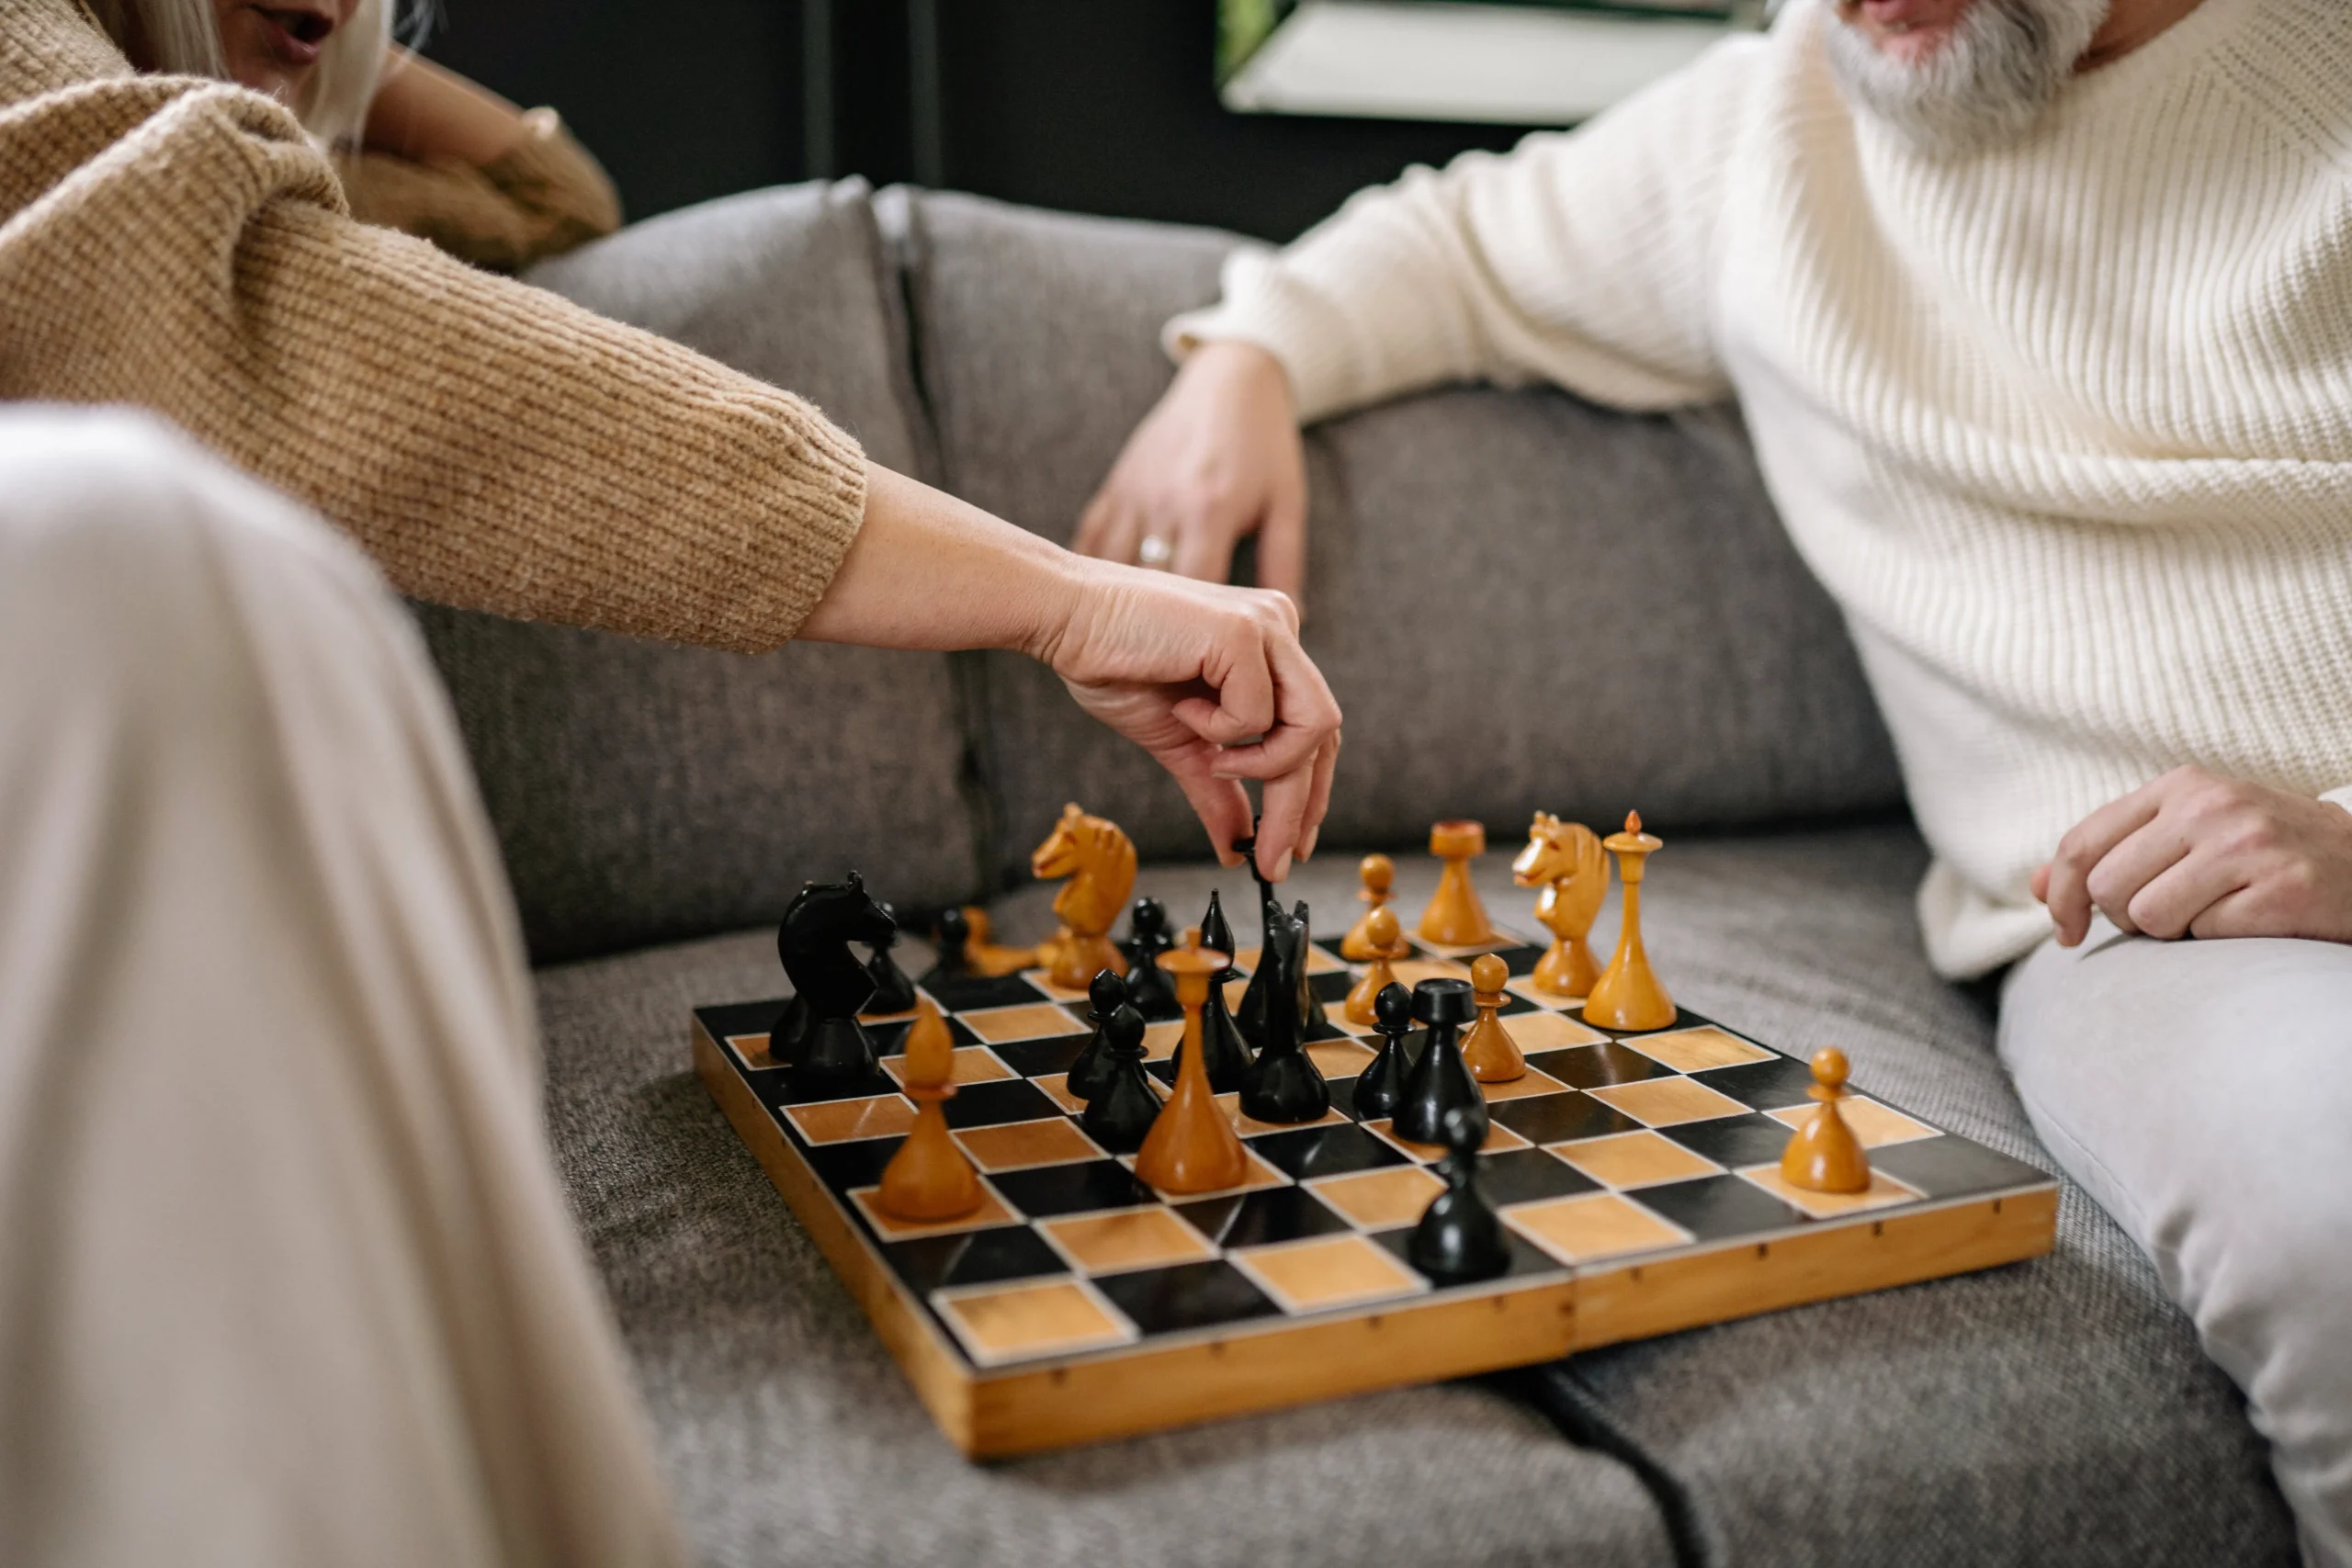 Two elderly people playing chess